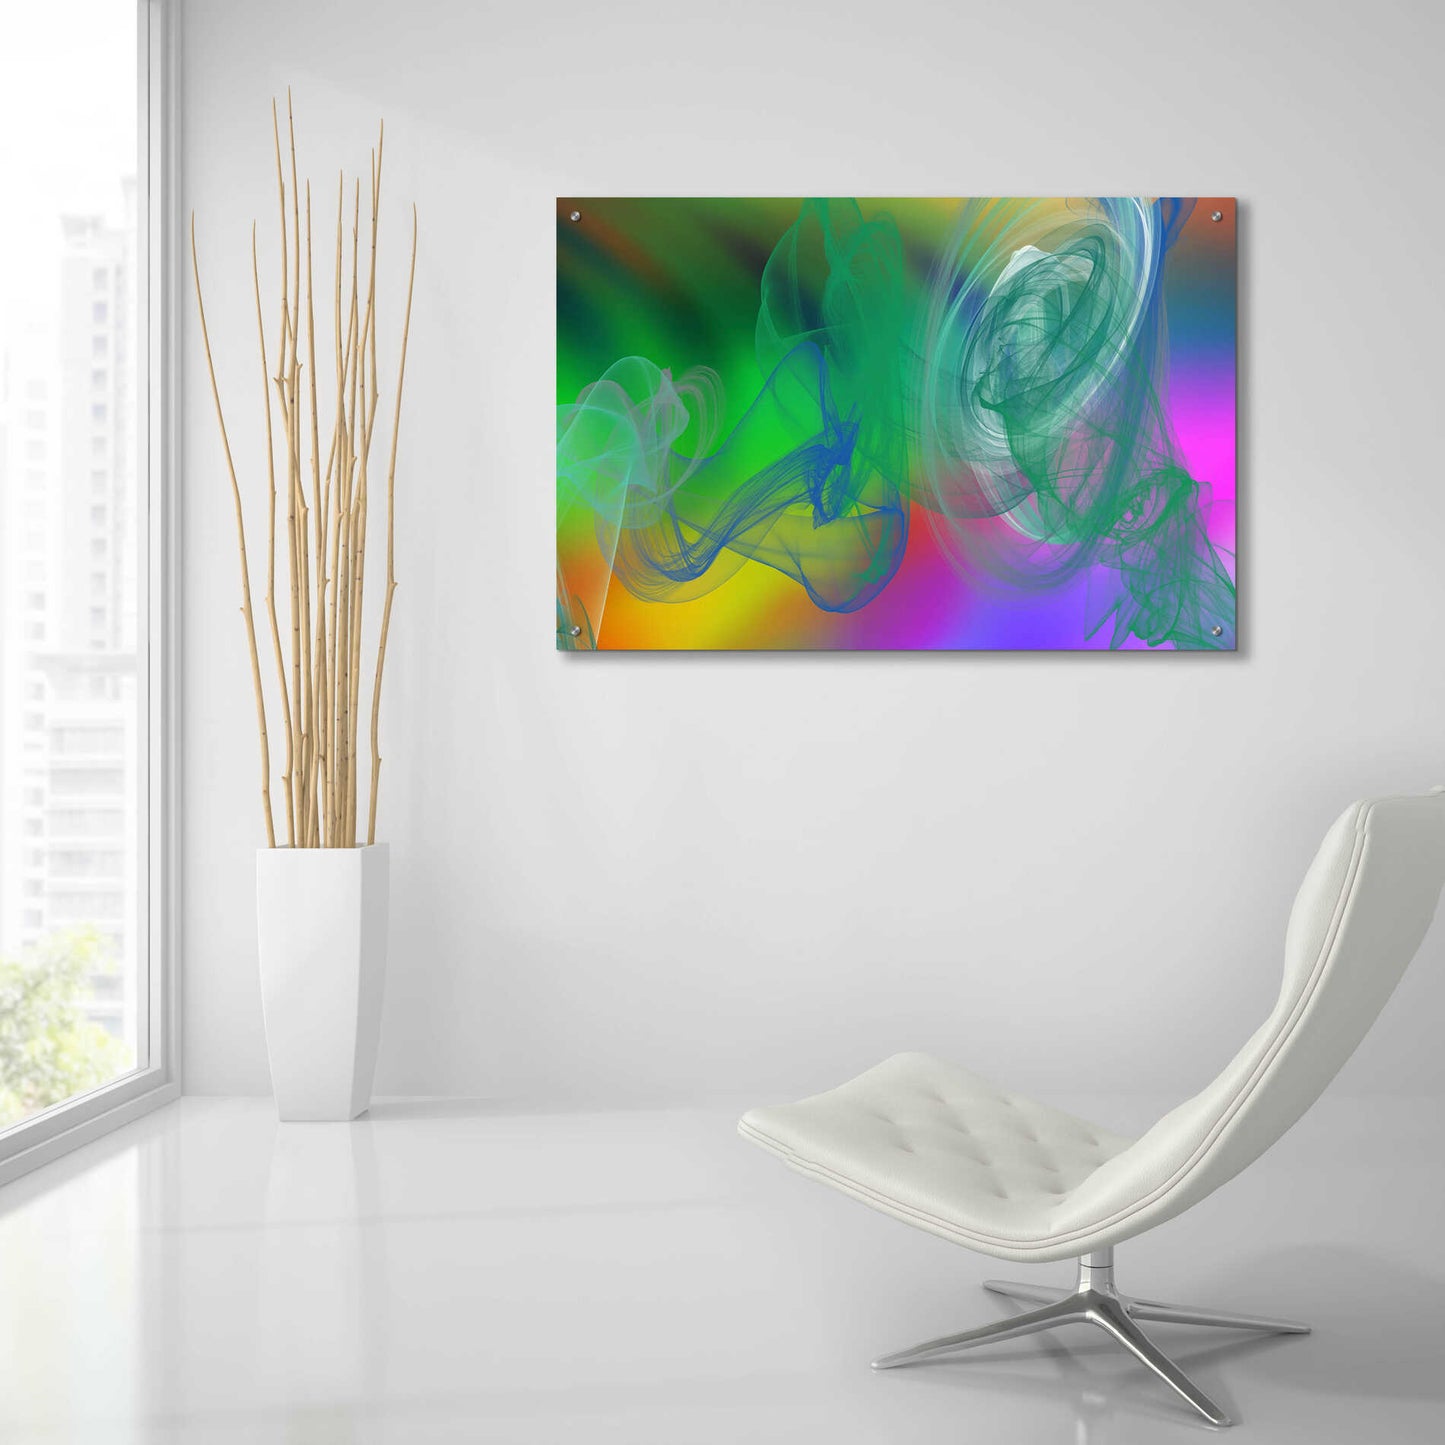 Epic Art 'Inverted Color In The Lines 5' by Irena Orlov Acrylic Glass Wall Art,36x24